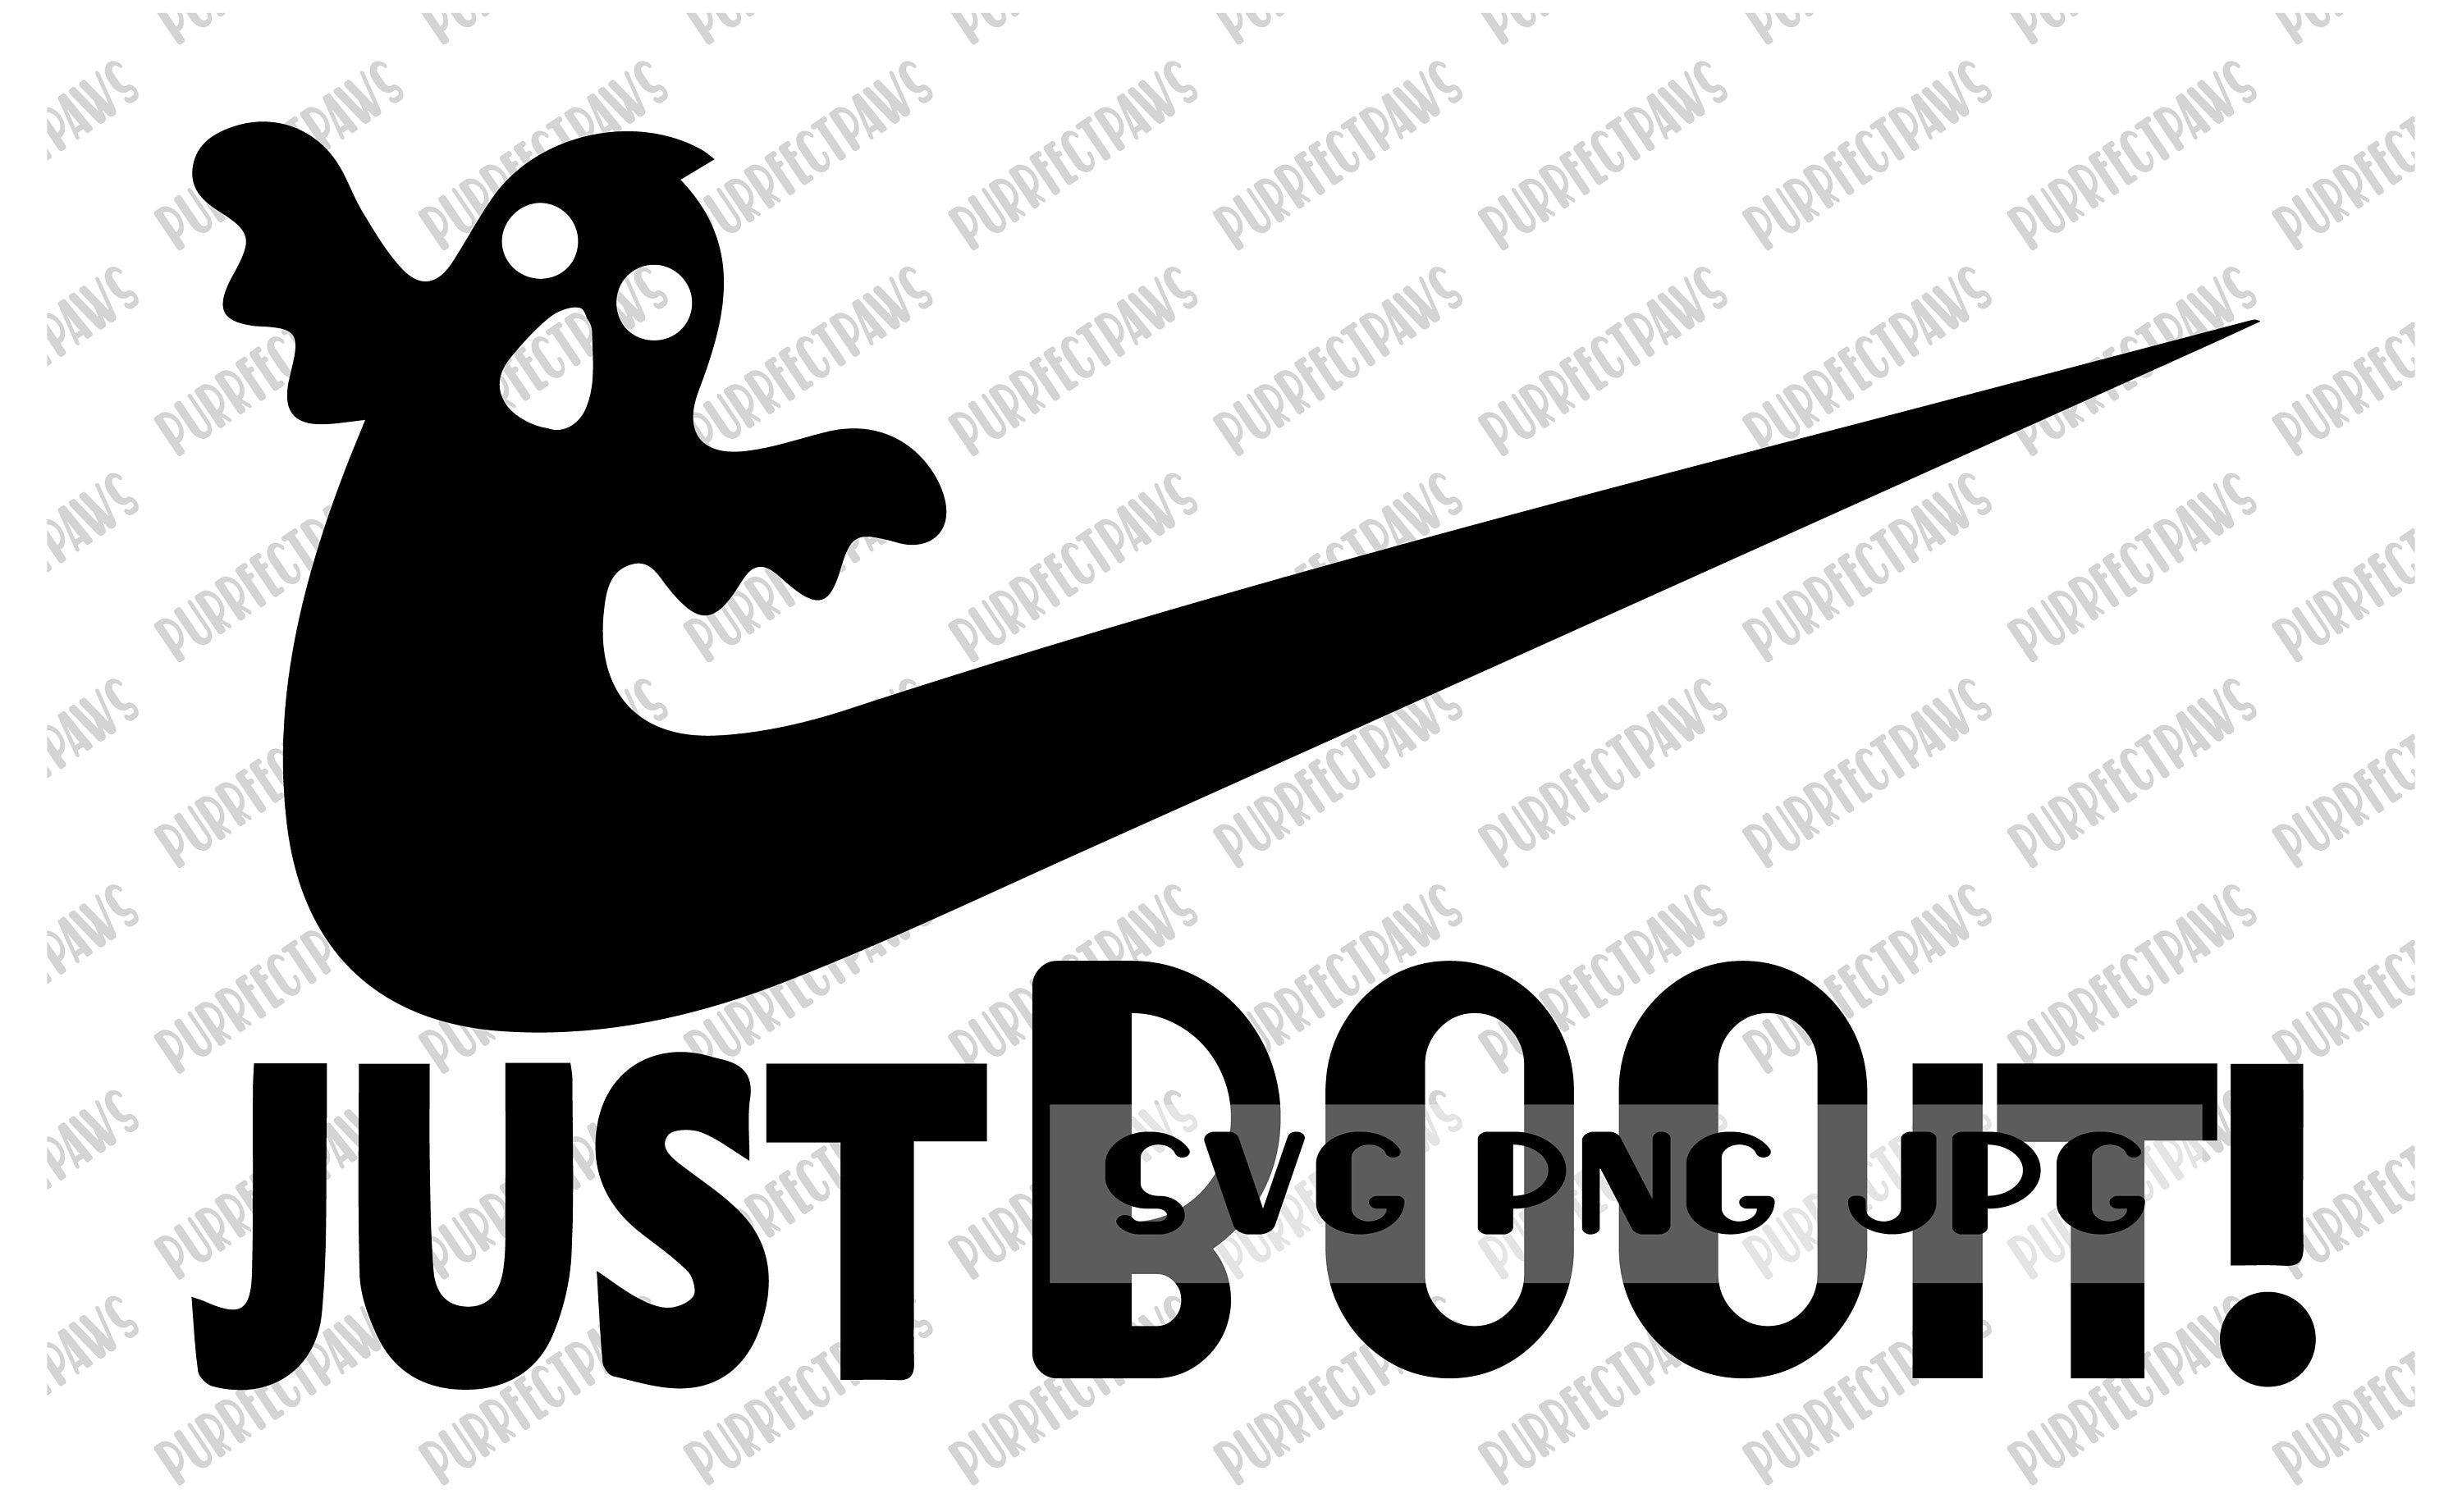 Floral Swoosh SVG, Flower Swoosh SVG, Nike Logo SVG, PNG, DXF, EPS, Cut  Files for Cricut and Silhouette